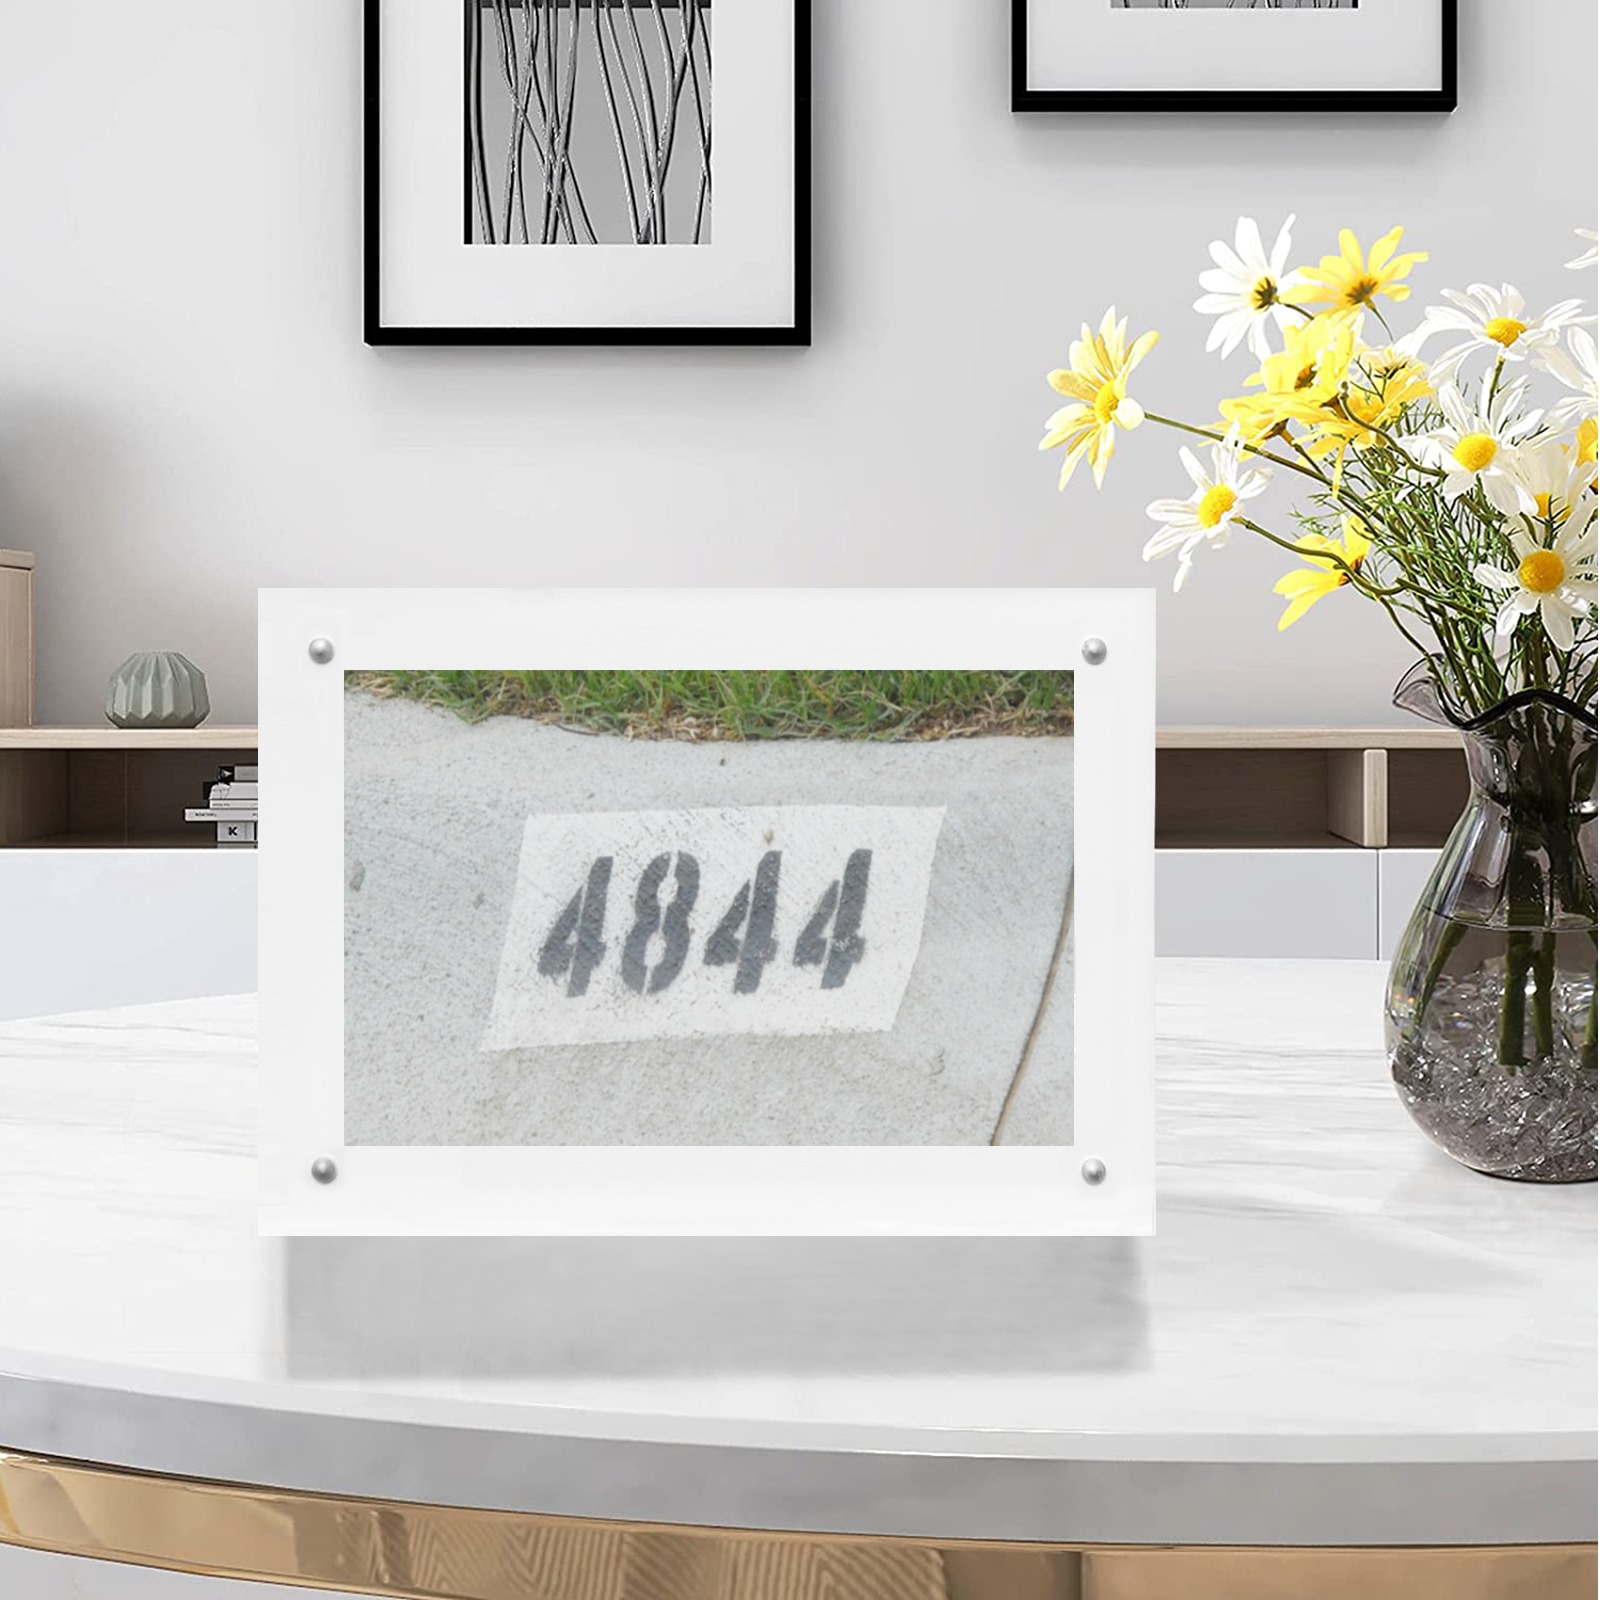 Street Number 4844 Acrylic Magnetic Photo Frame 7"x5"